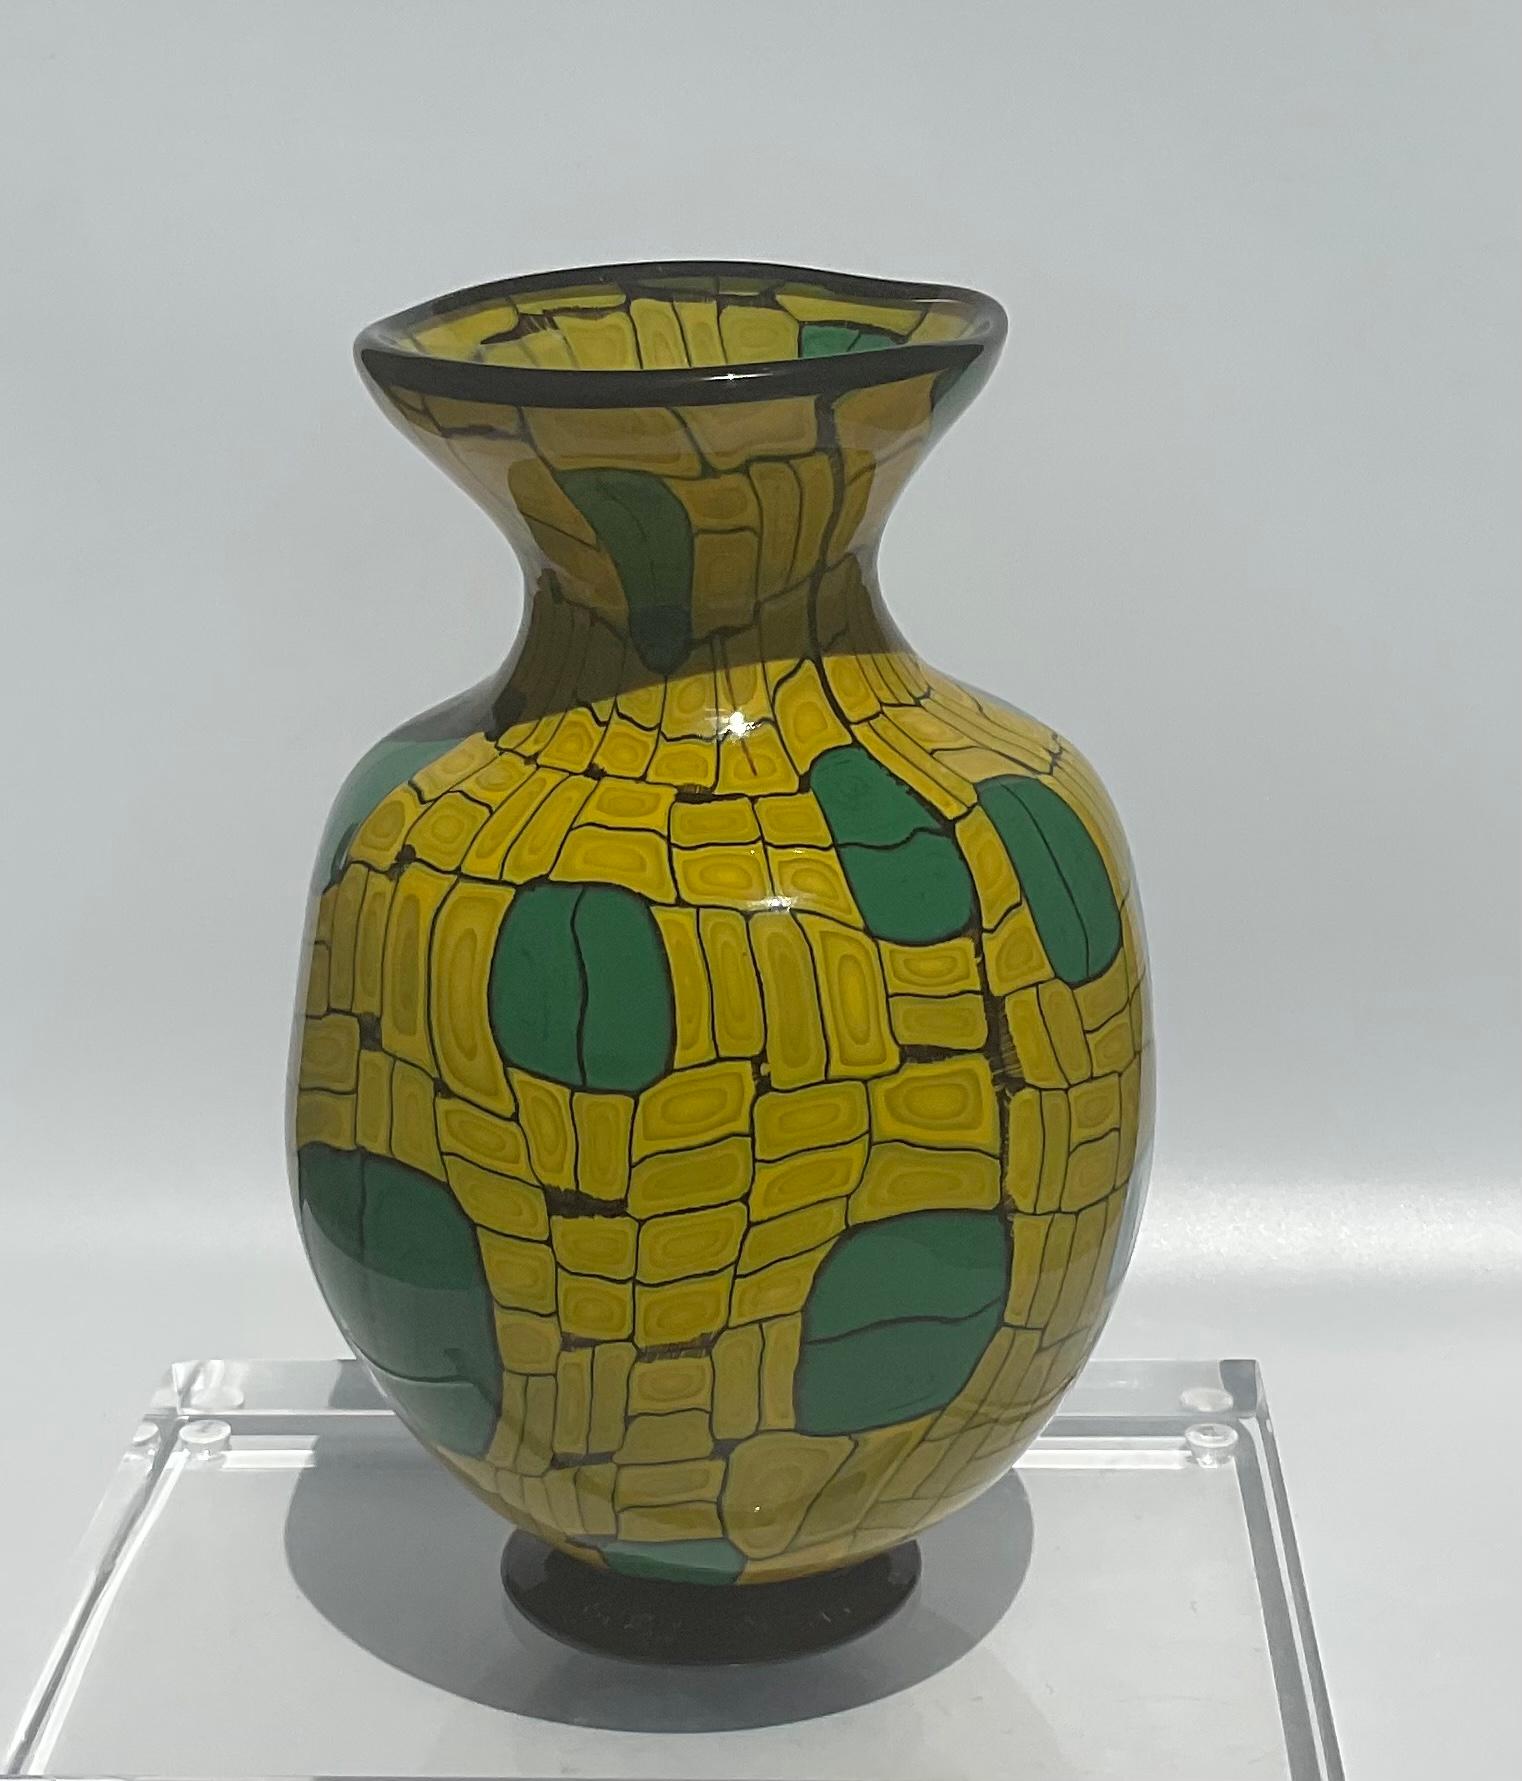 Ballerin Murano Art Glass Vase Yellow Murrine Decorated Signed by the Artist In Good Condition For Sale In Ann Arbor, MI